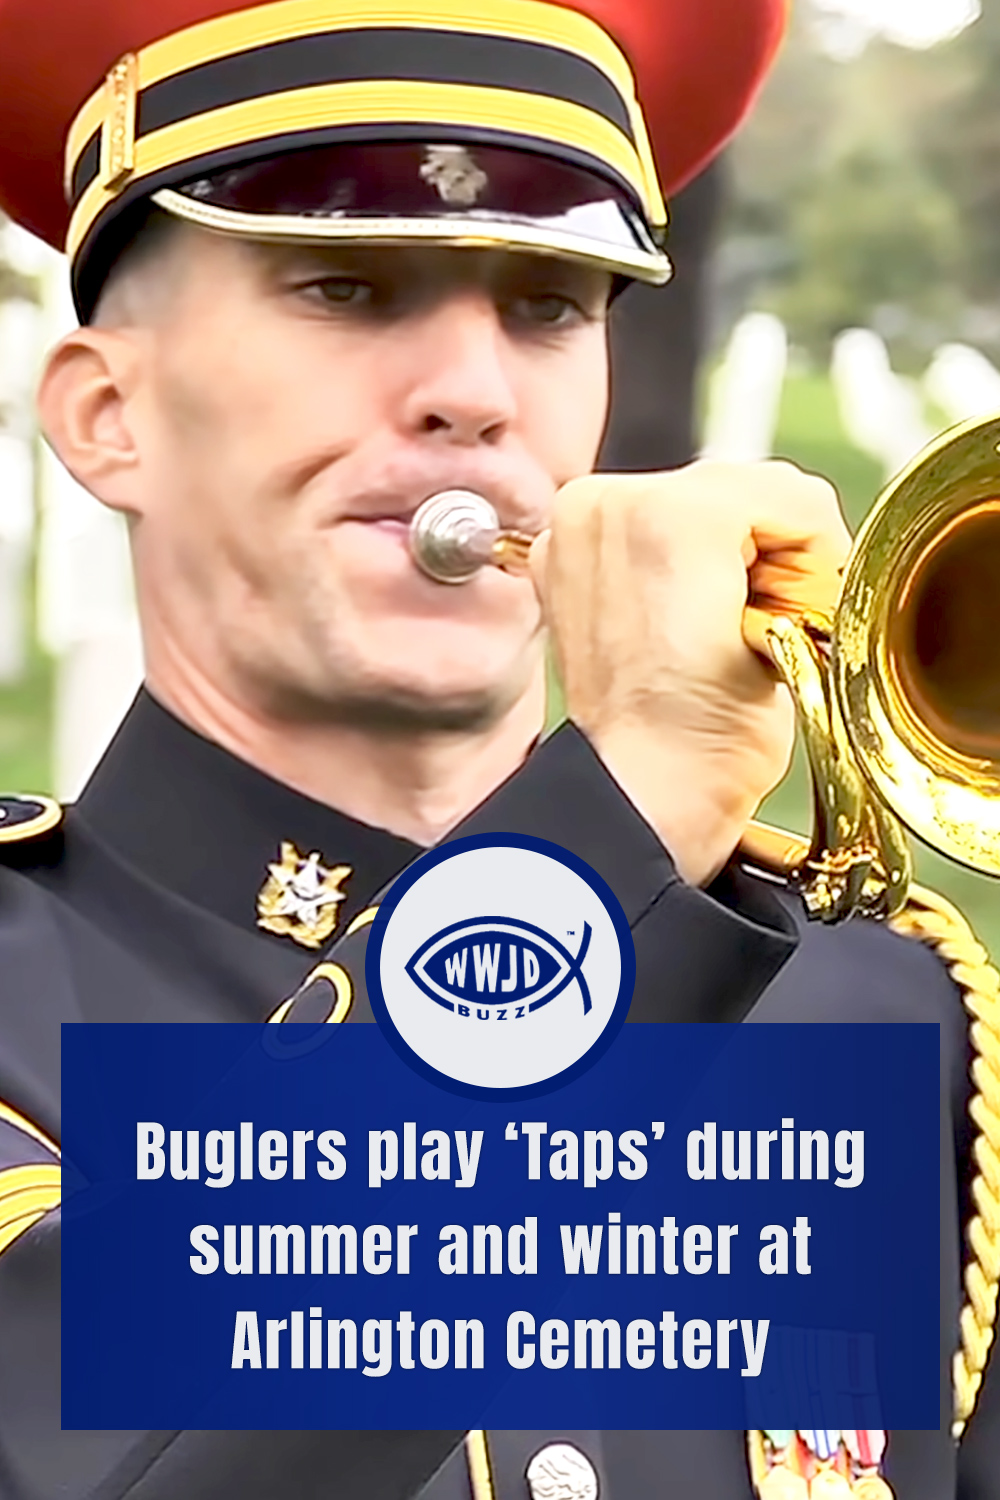 Buglers play ‘Taps’ during summer and winter at Arlington Cemetery